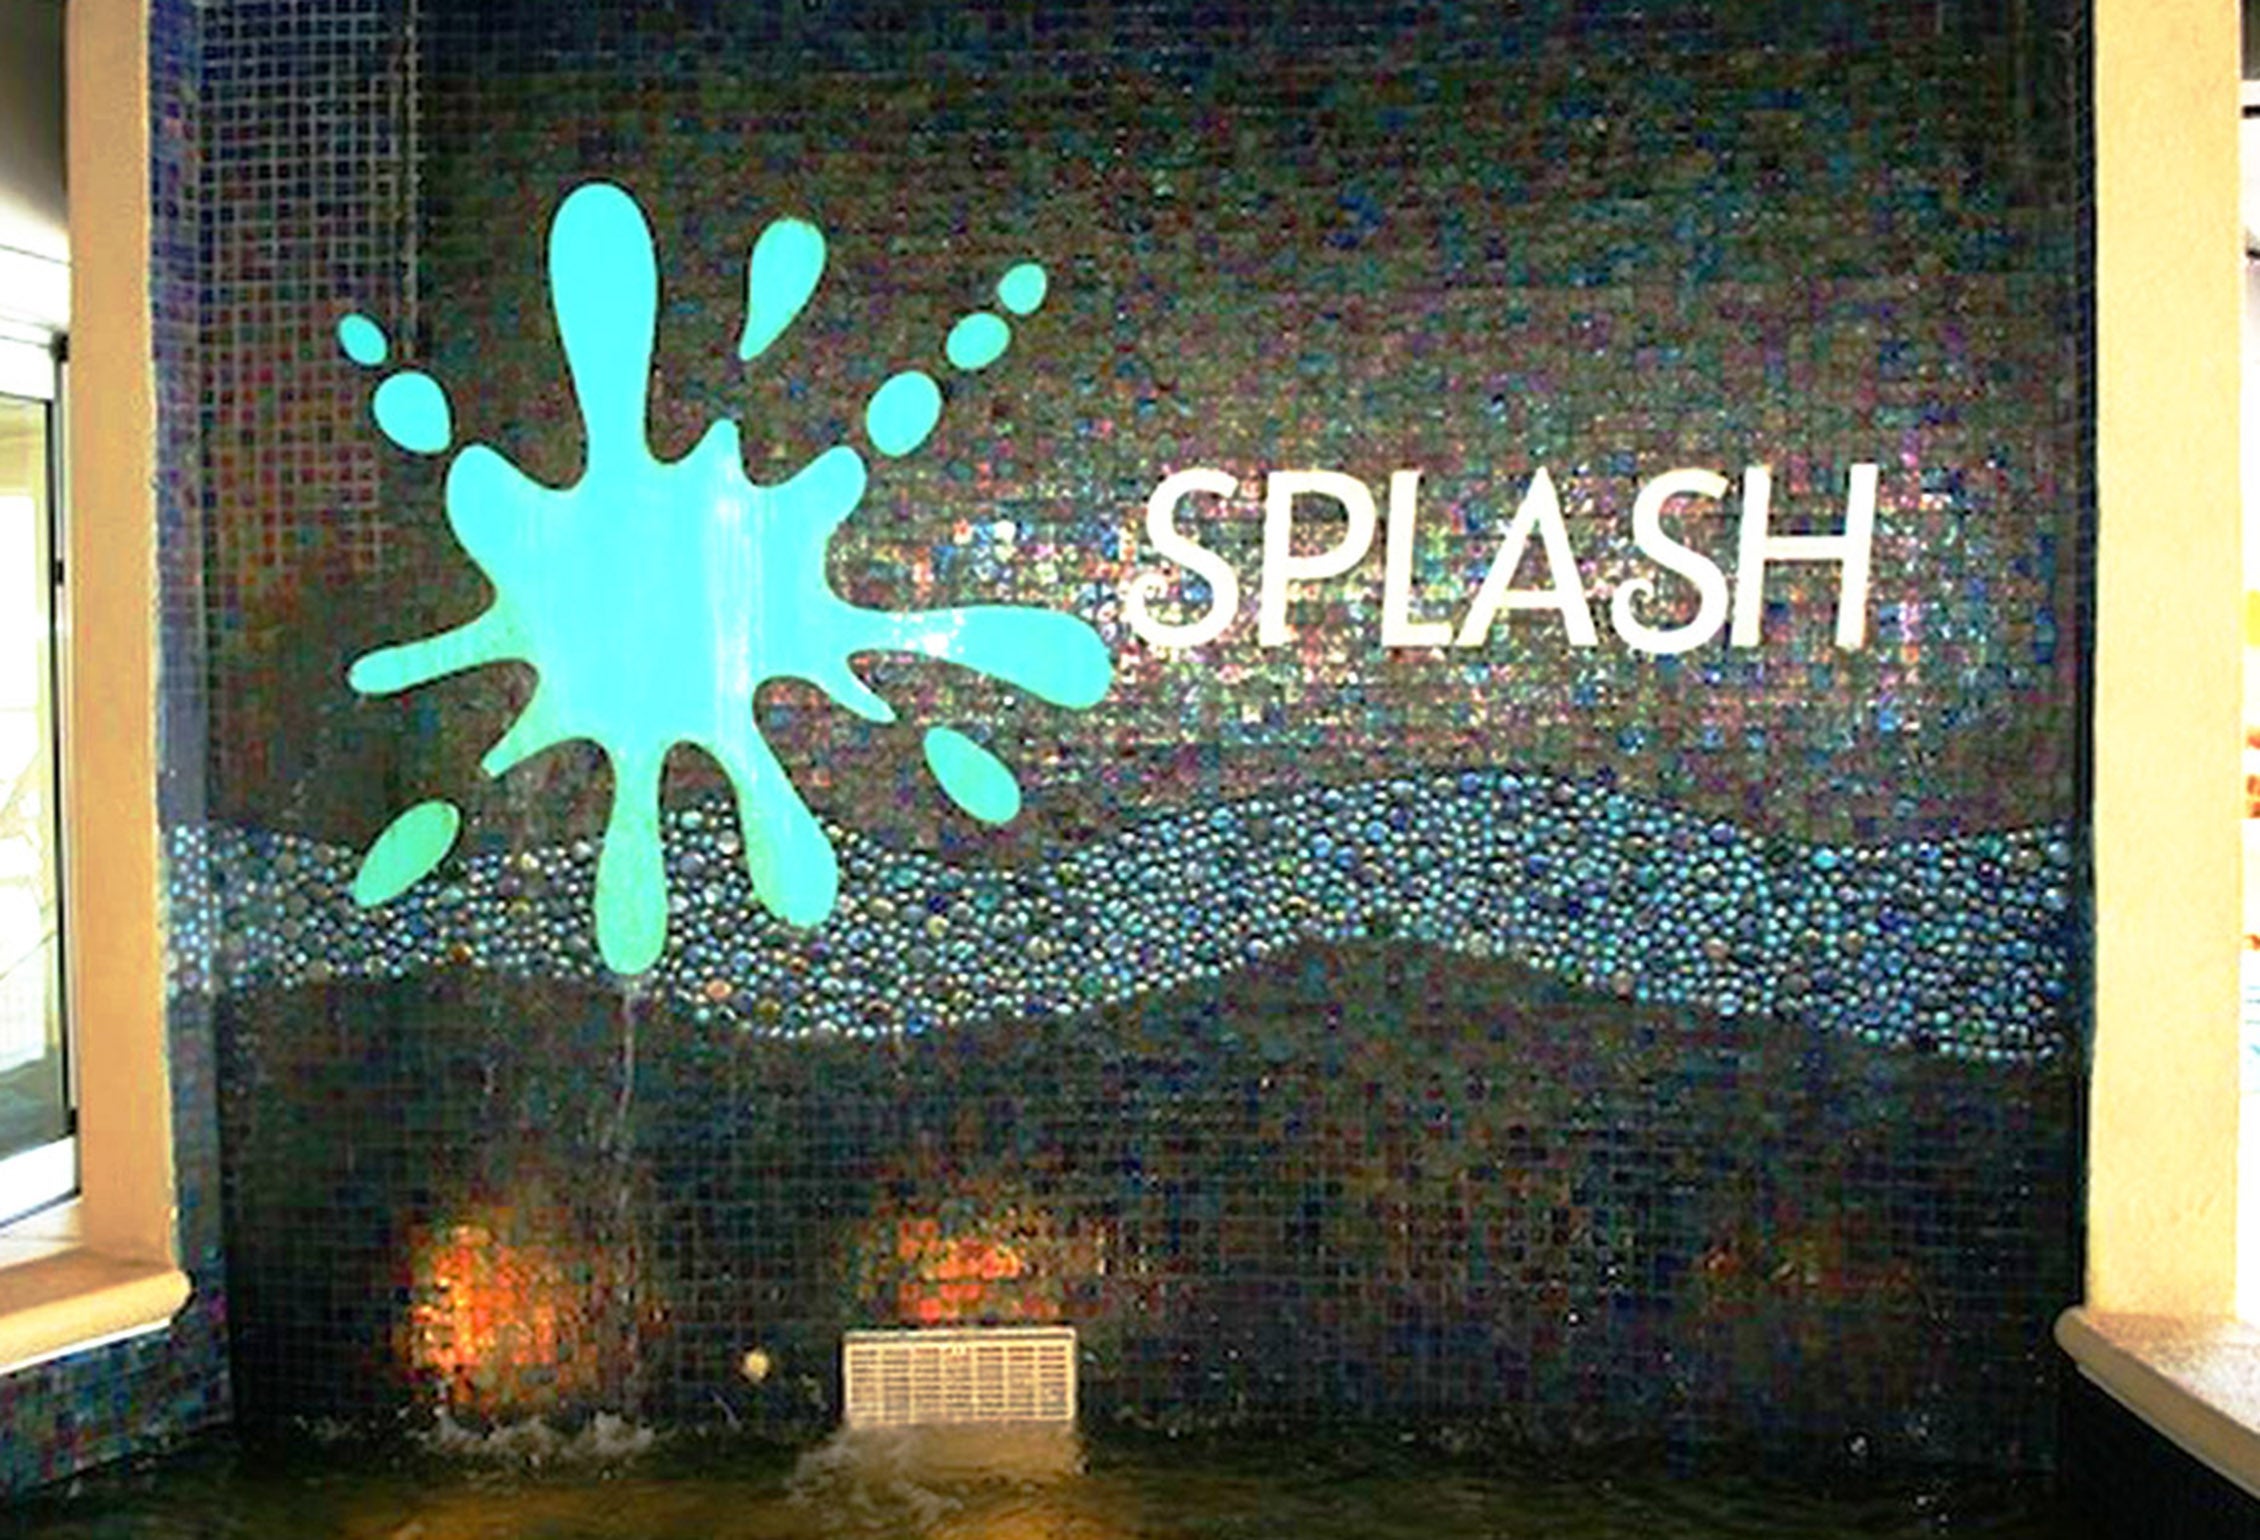 Lovely Waterfall feature at Splash